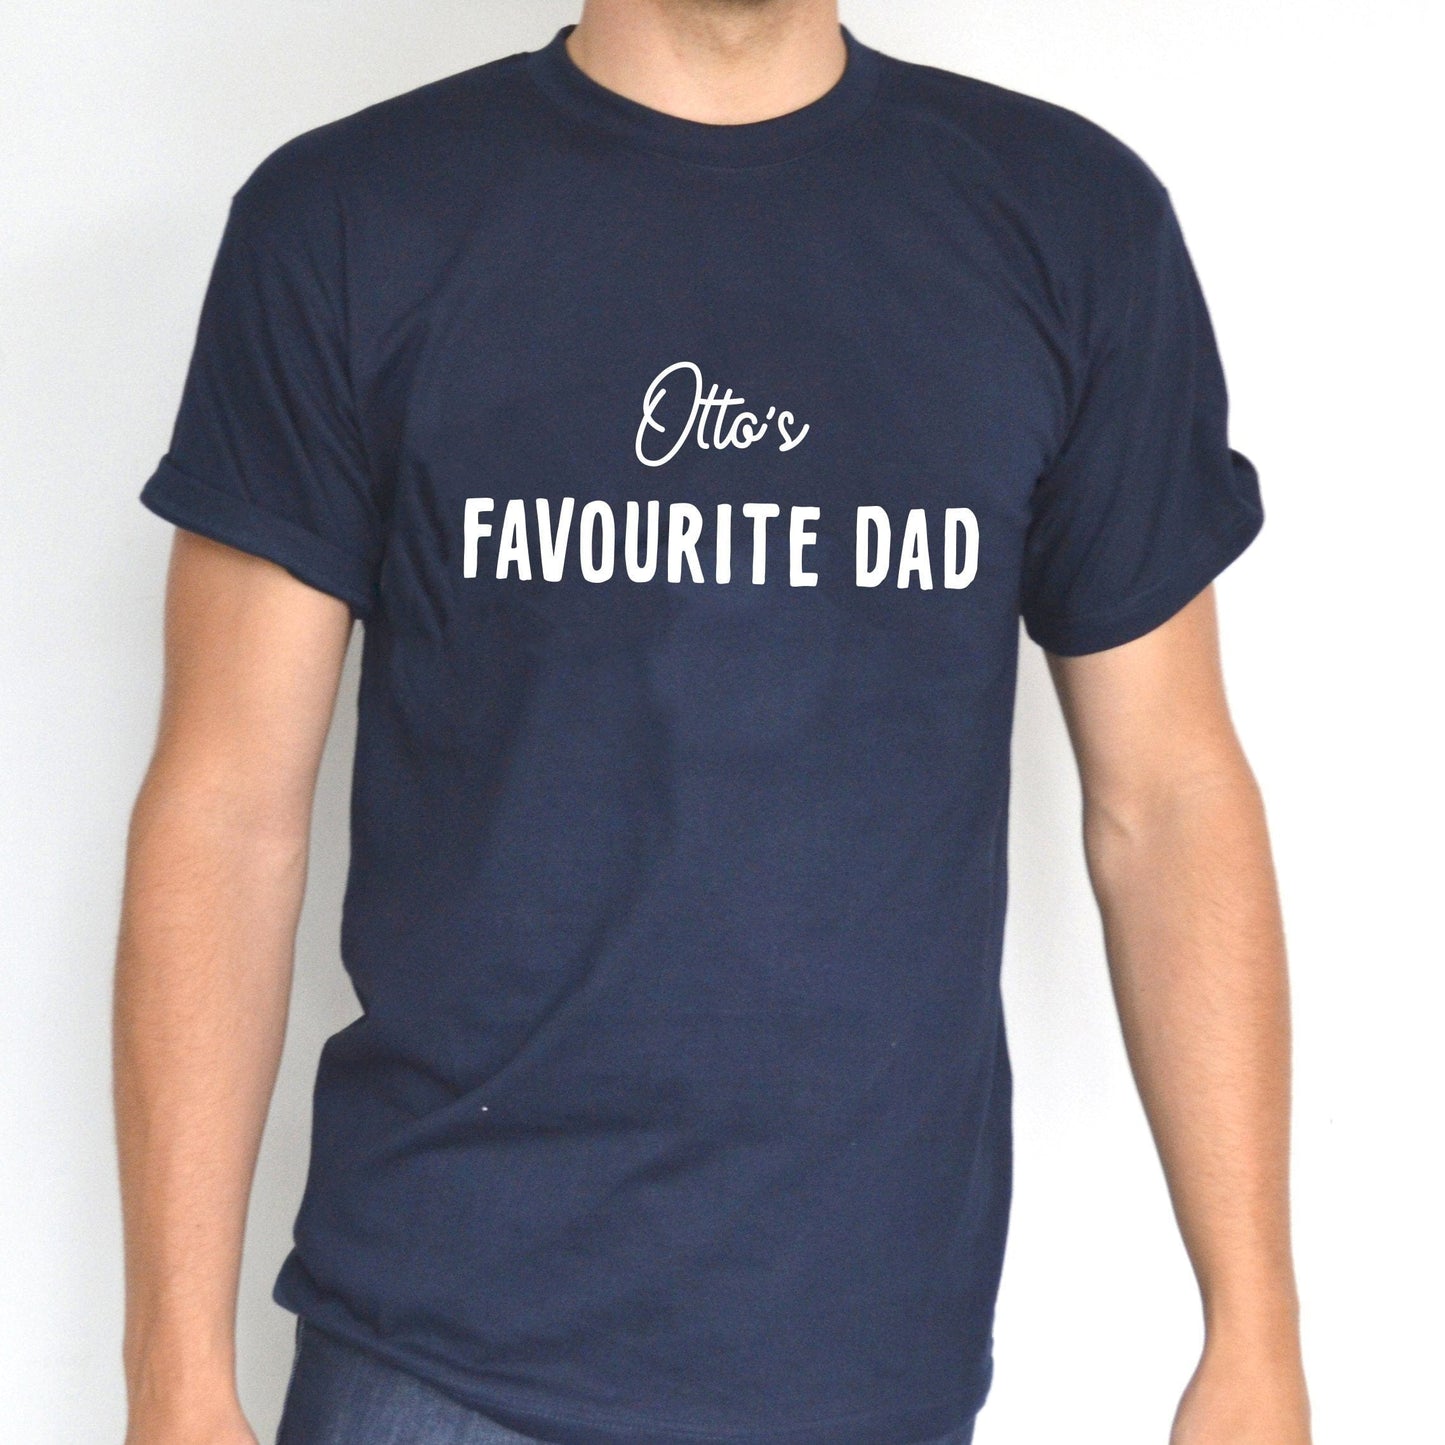 Daddy and Me Favourite Child T - shirt